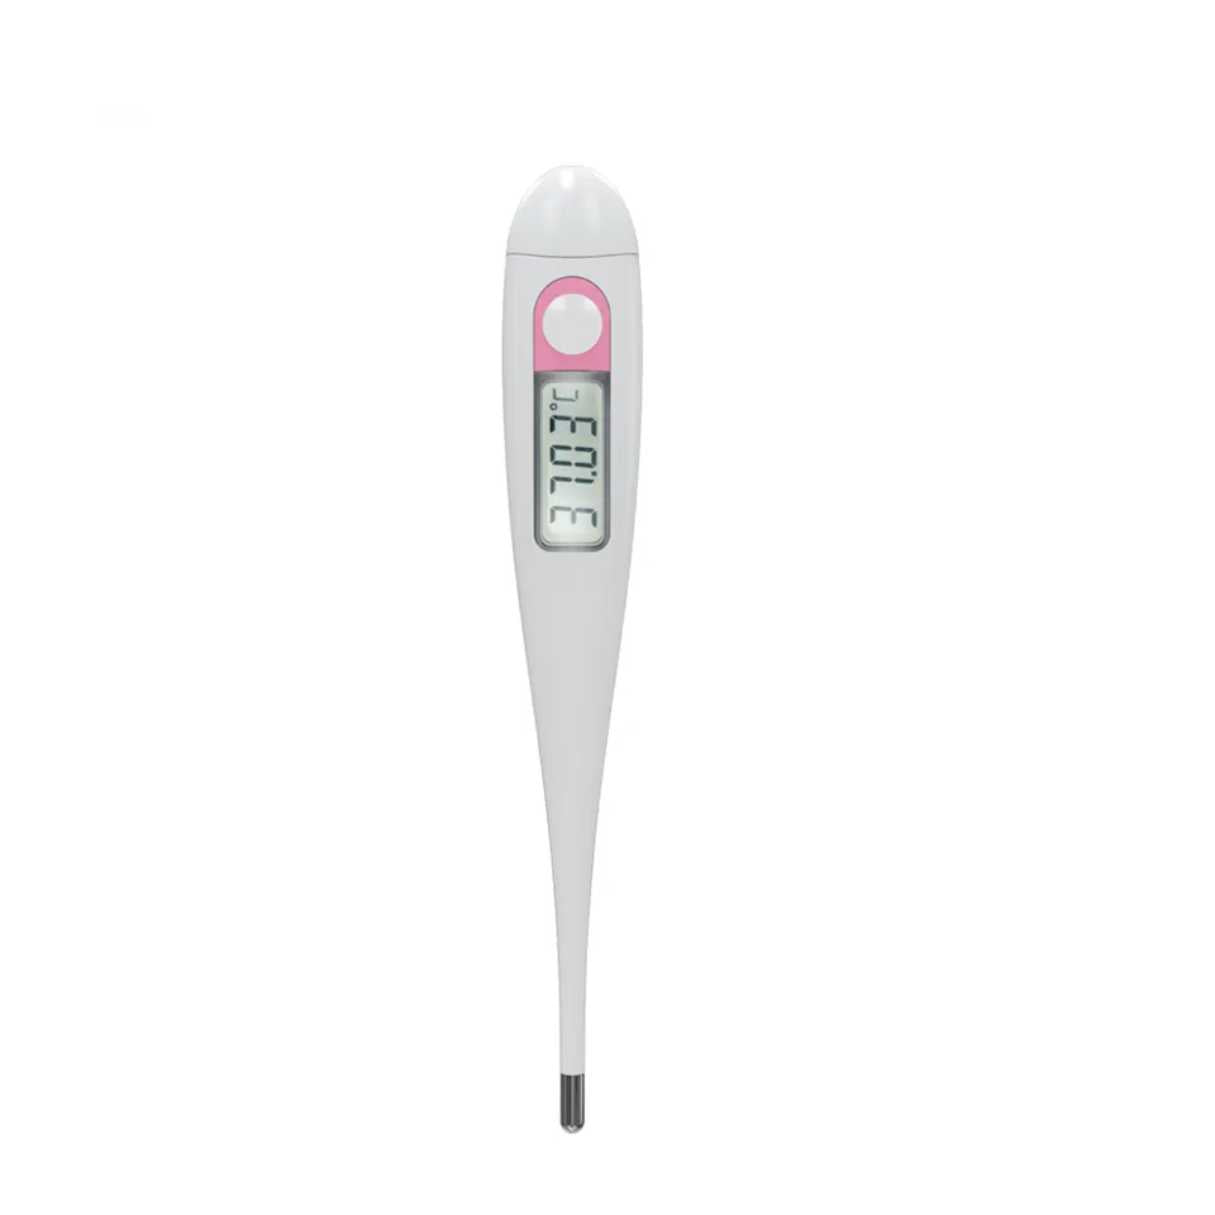 basal body temperature thermometer with two decimal points to pinpoint ovulation day